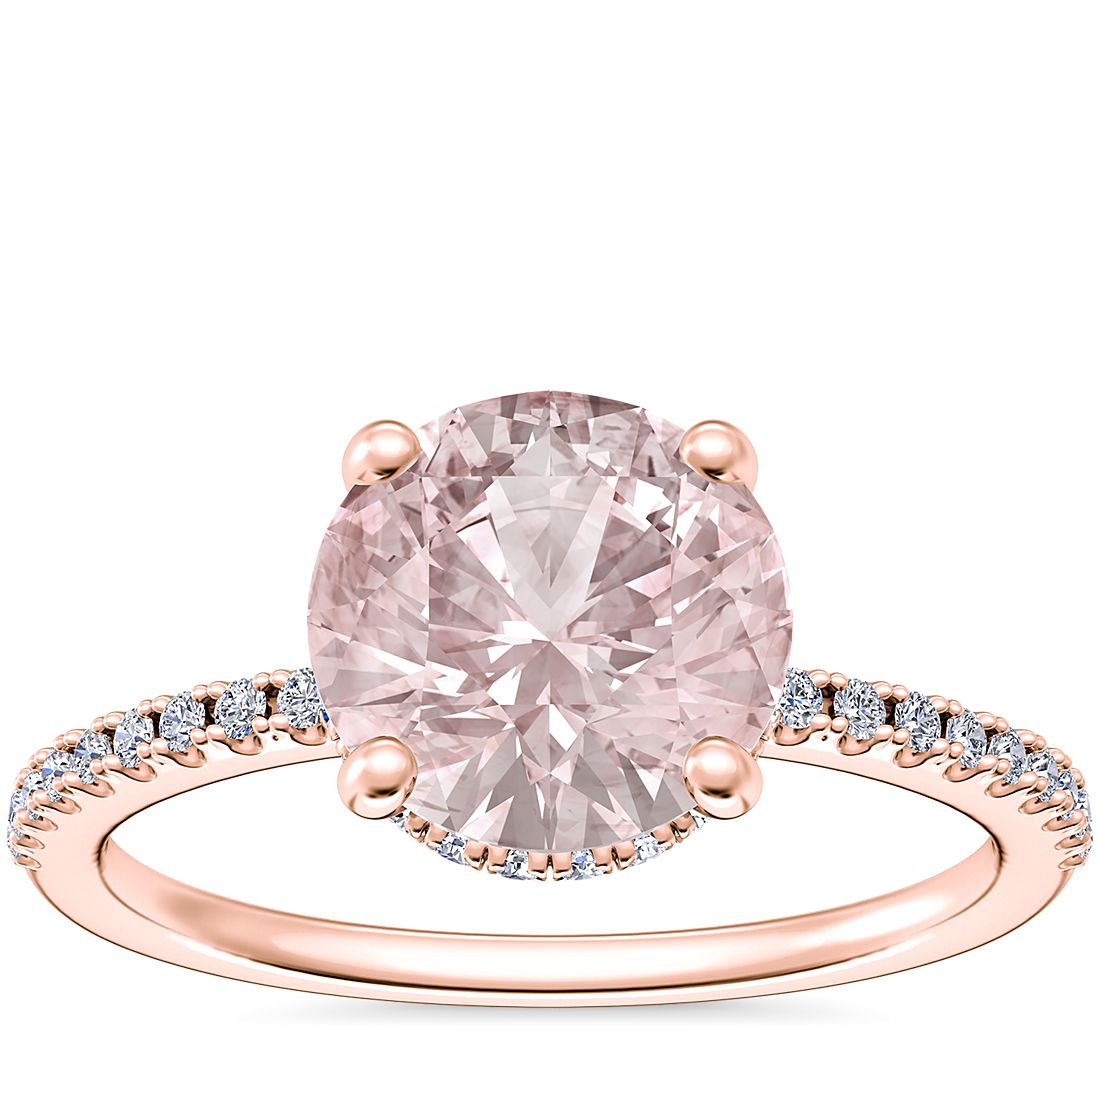 Petite Micropavé Hidden Halo Engagement Ring with Round Morganite in 14k Rose Gold (8mm)